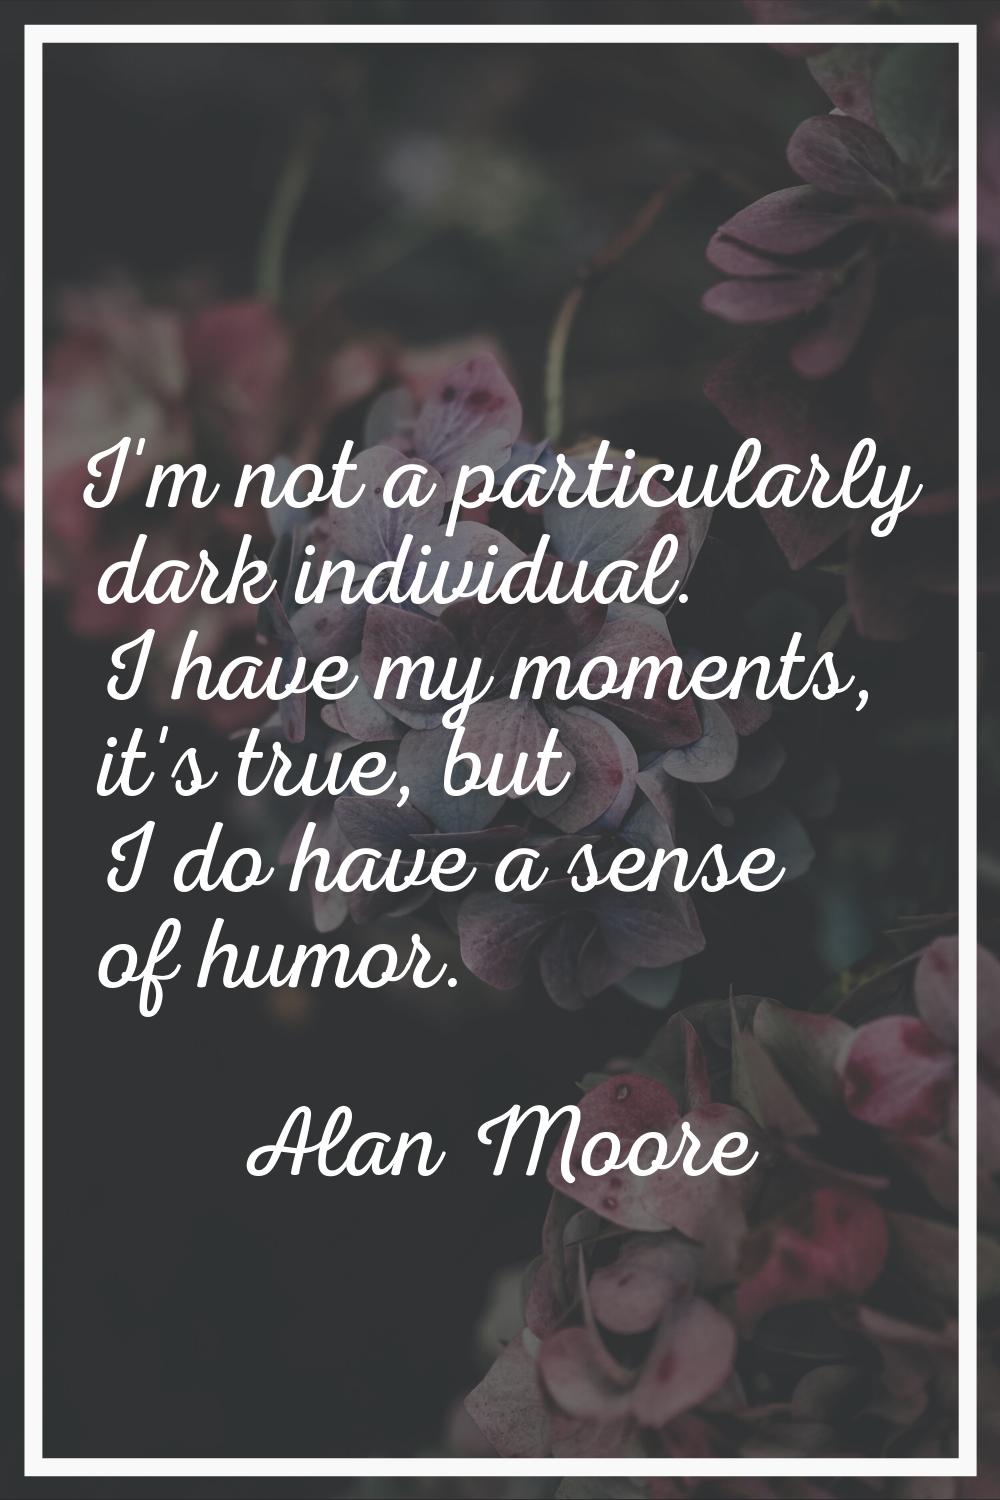 I'm not a particularly dark individual. I have my moments, it's true, but I do have a sense of humo